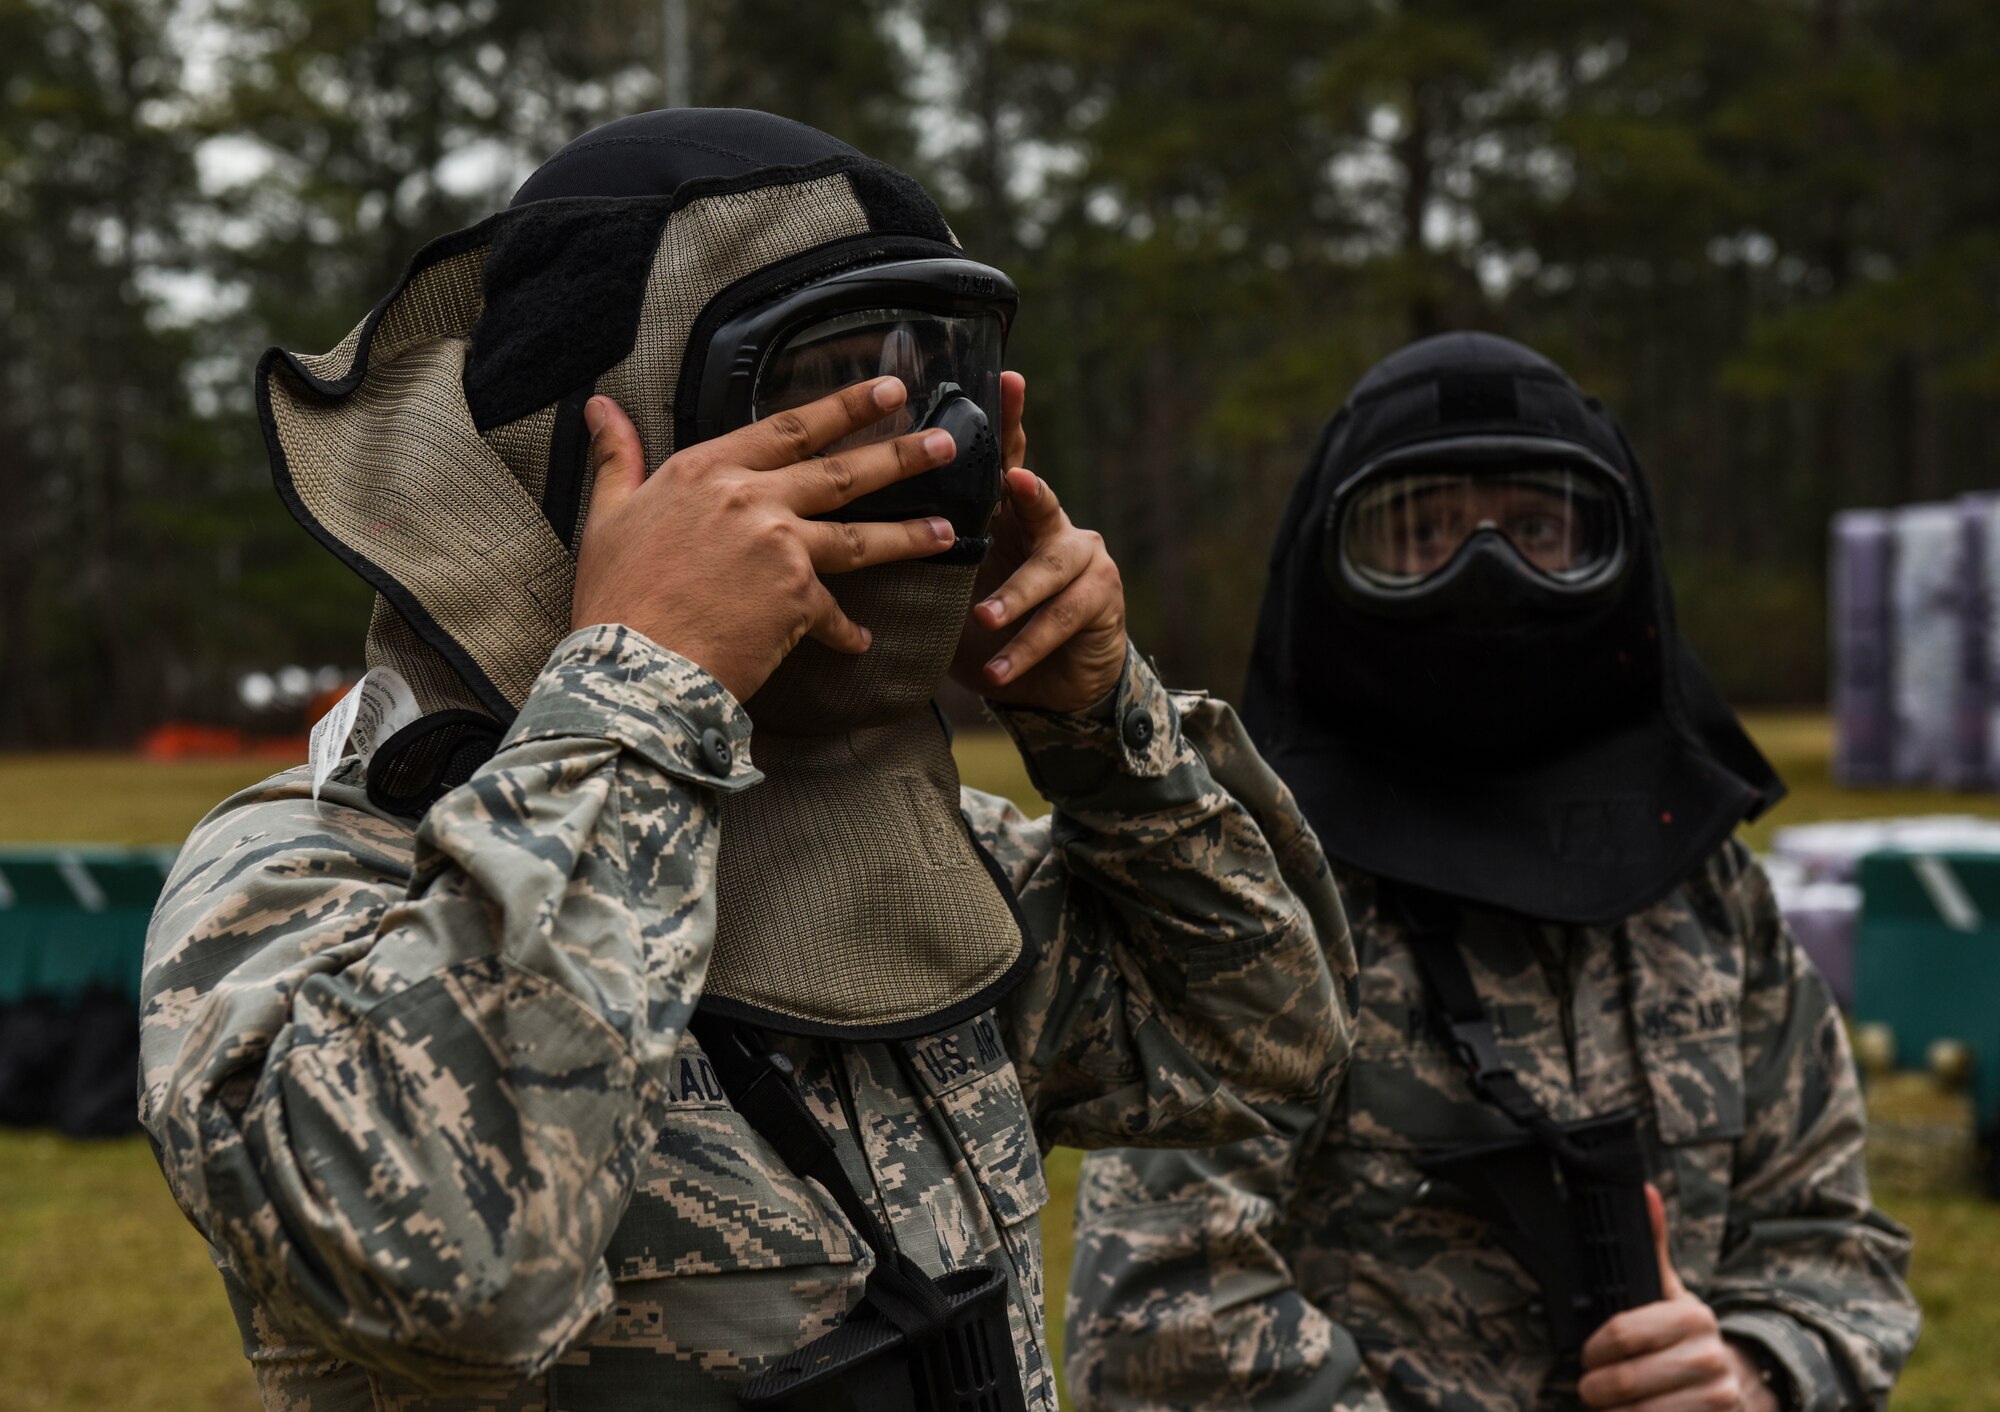 Cadets from the Citadel don protective gear prior to a live-fire exercise at the Naval Weapons Station Charleston, Joint Base Charleston, S.C., March 3, 2020.